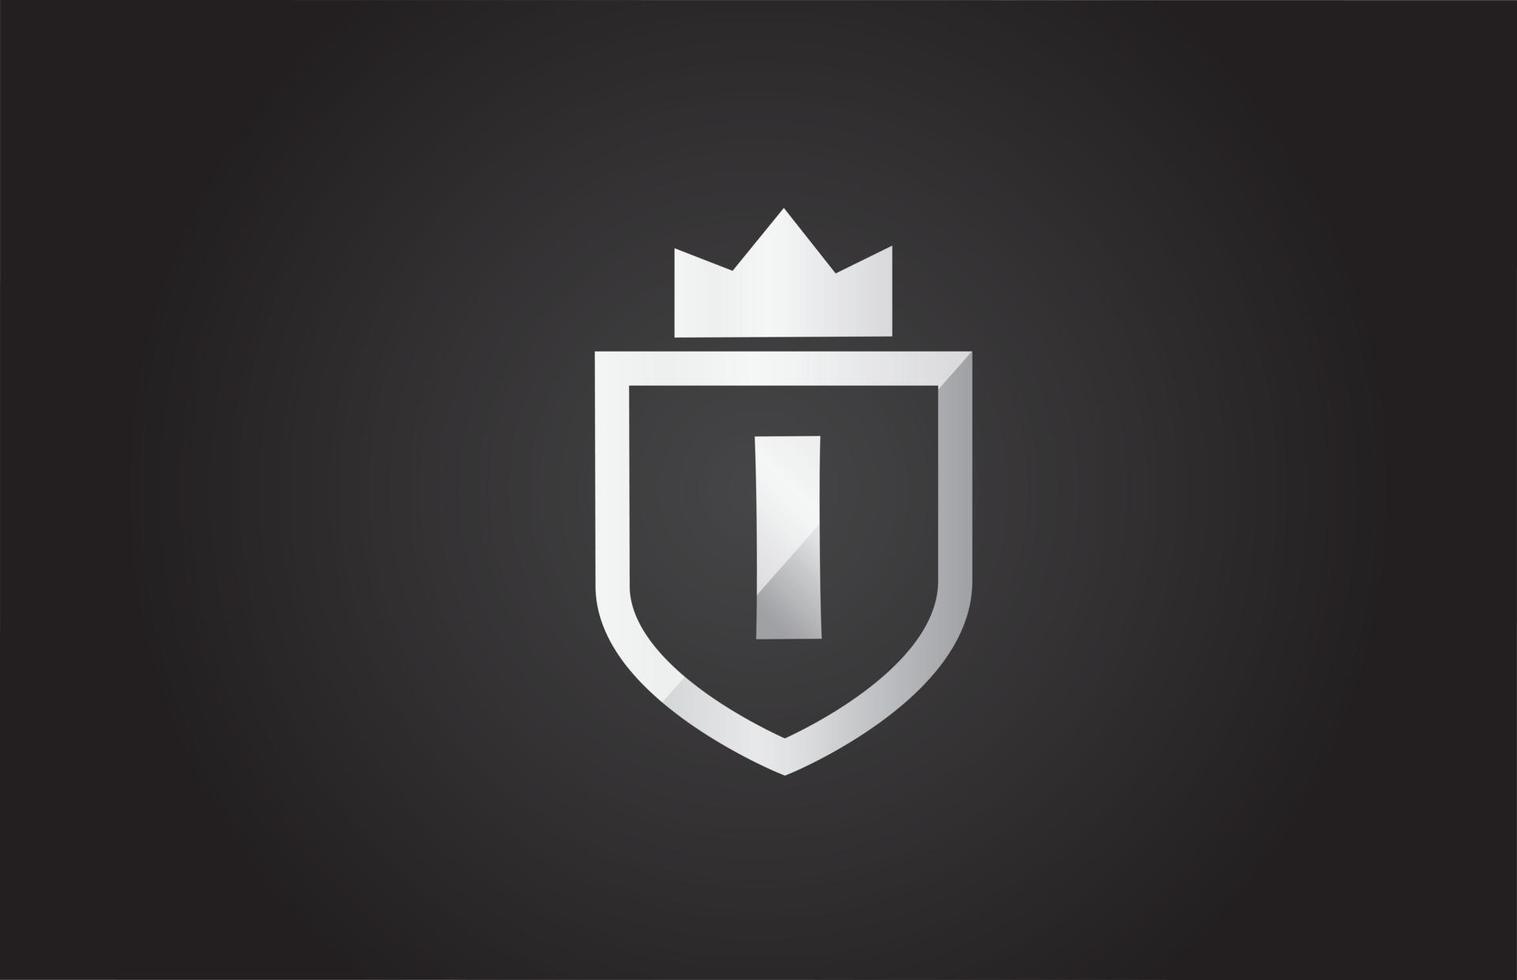 I alphabet letter logo icon in grey and black color. Shield design for company identity with king crown vector